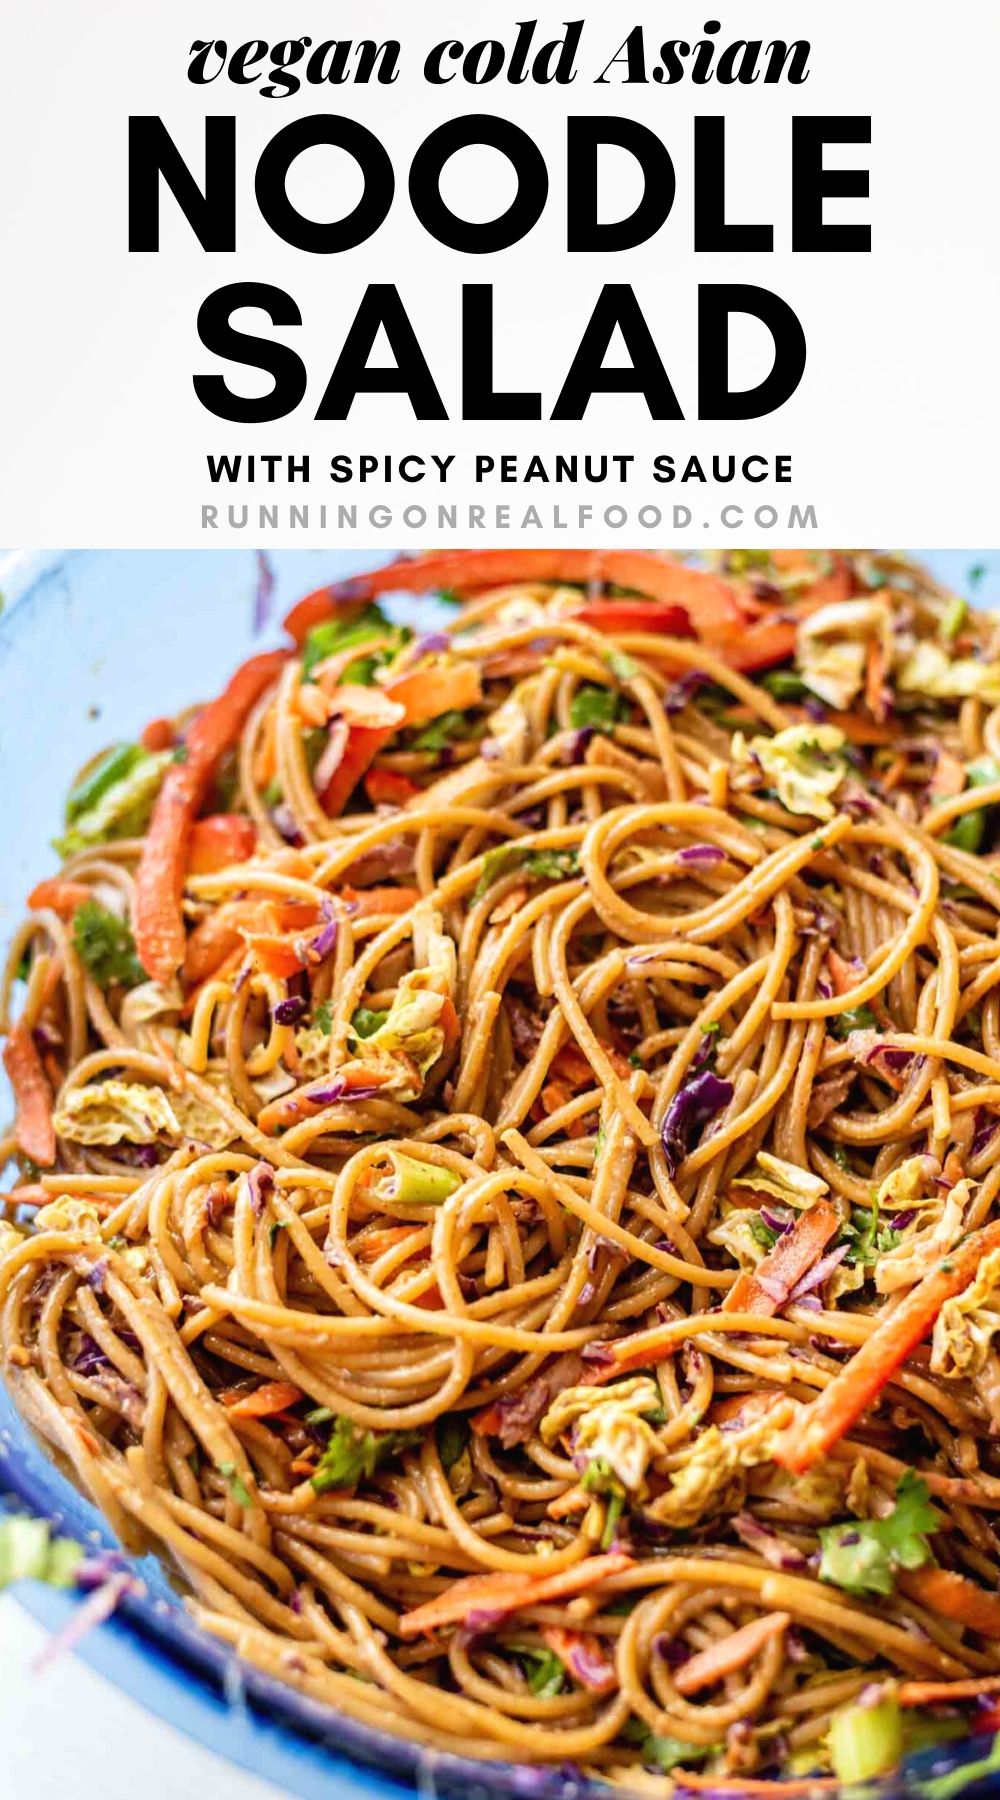 Cold Asian Noodle Salad with Peanut Dressing - Running on Real Food